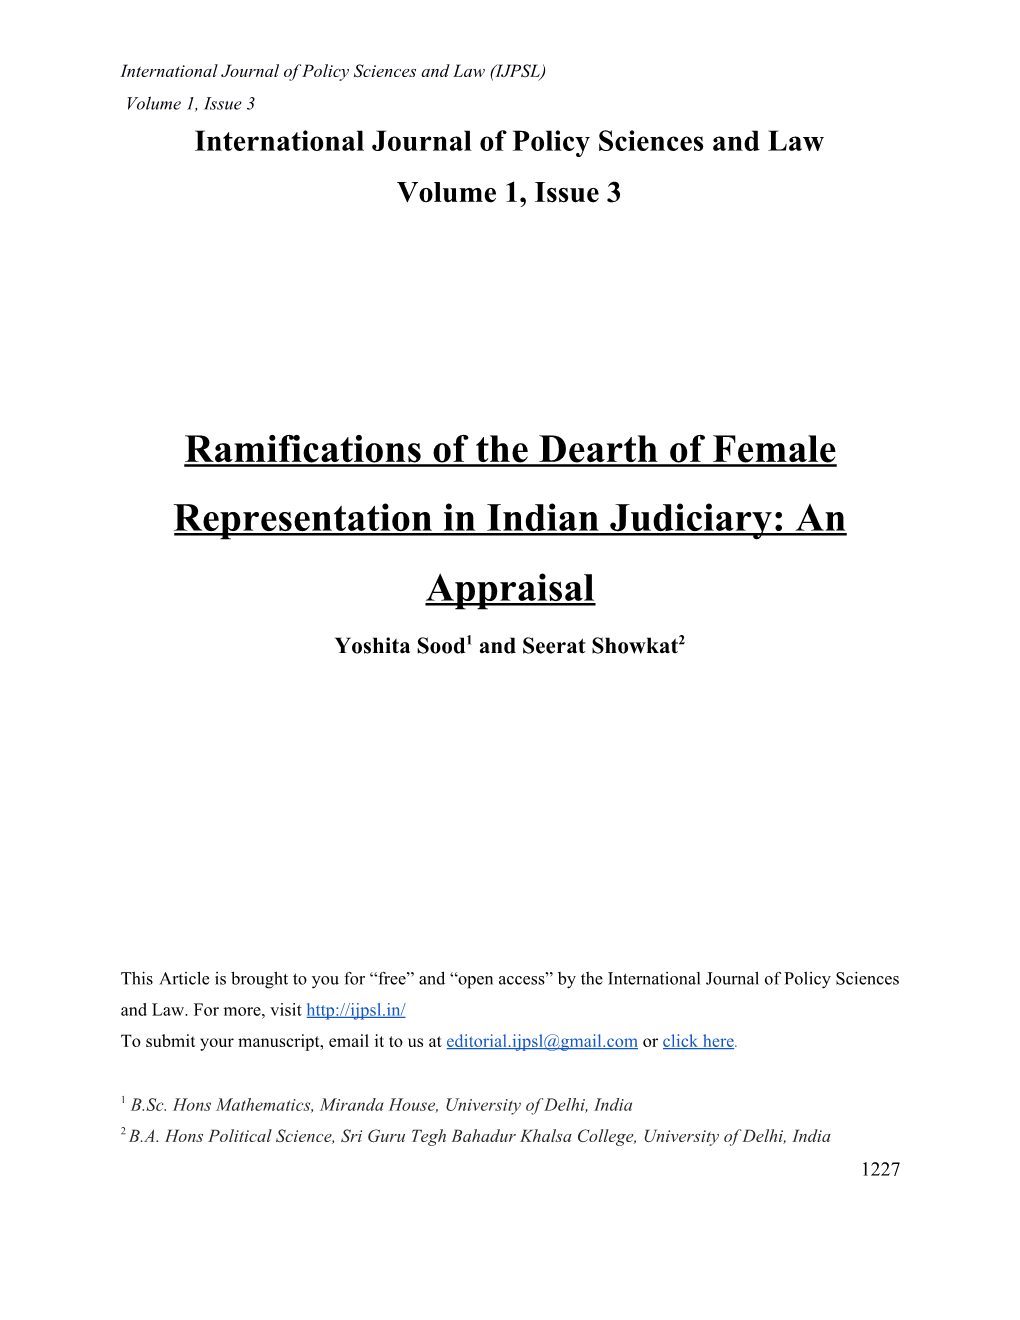 Ramifications of the Dearth of Female Representation in Indian Judiciary: an Appraisal